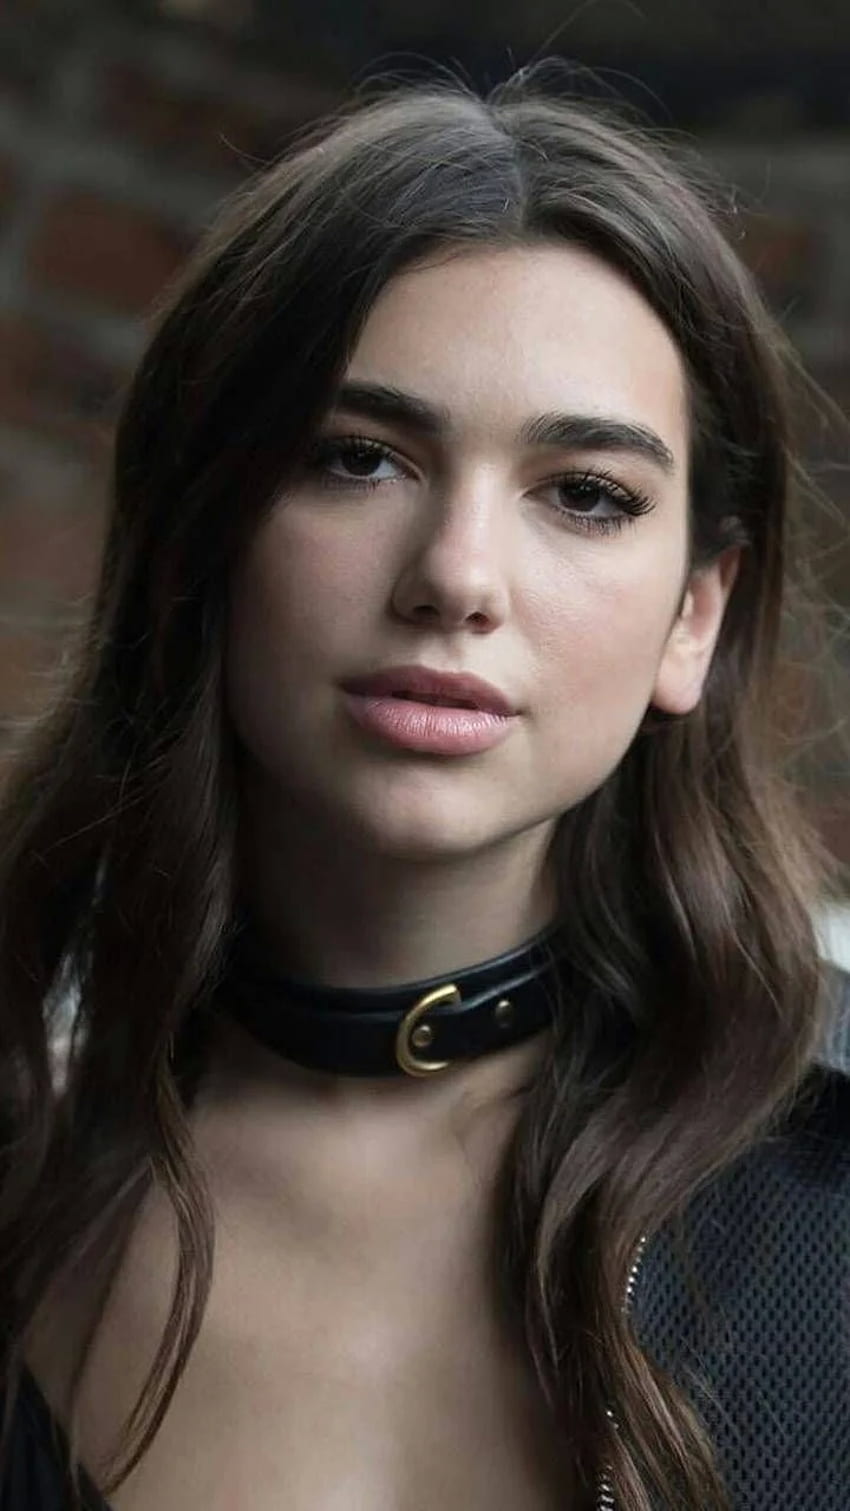 Dua lipa hand placed next to her facebrown hair red lips yellow dress HD  wallpaper download